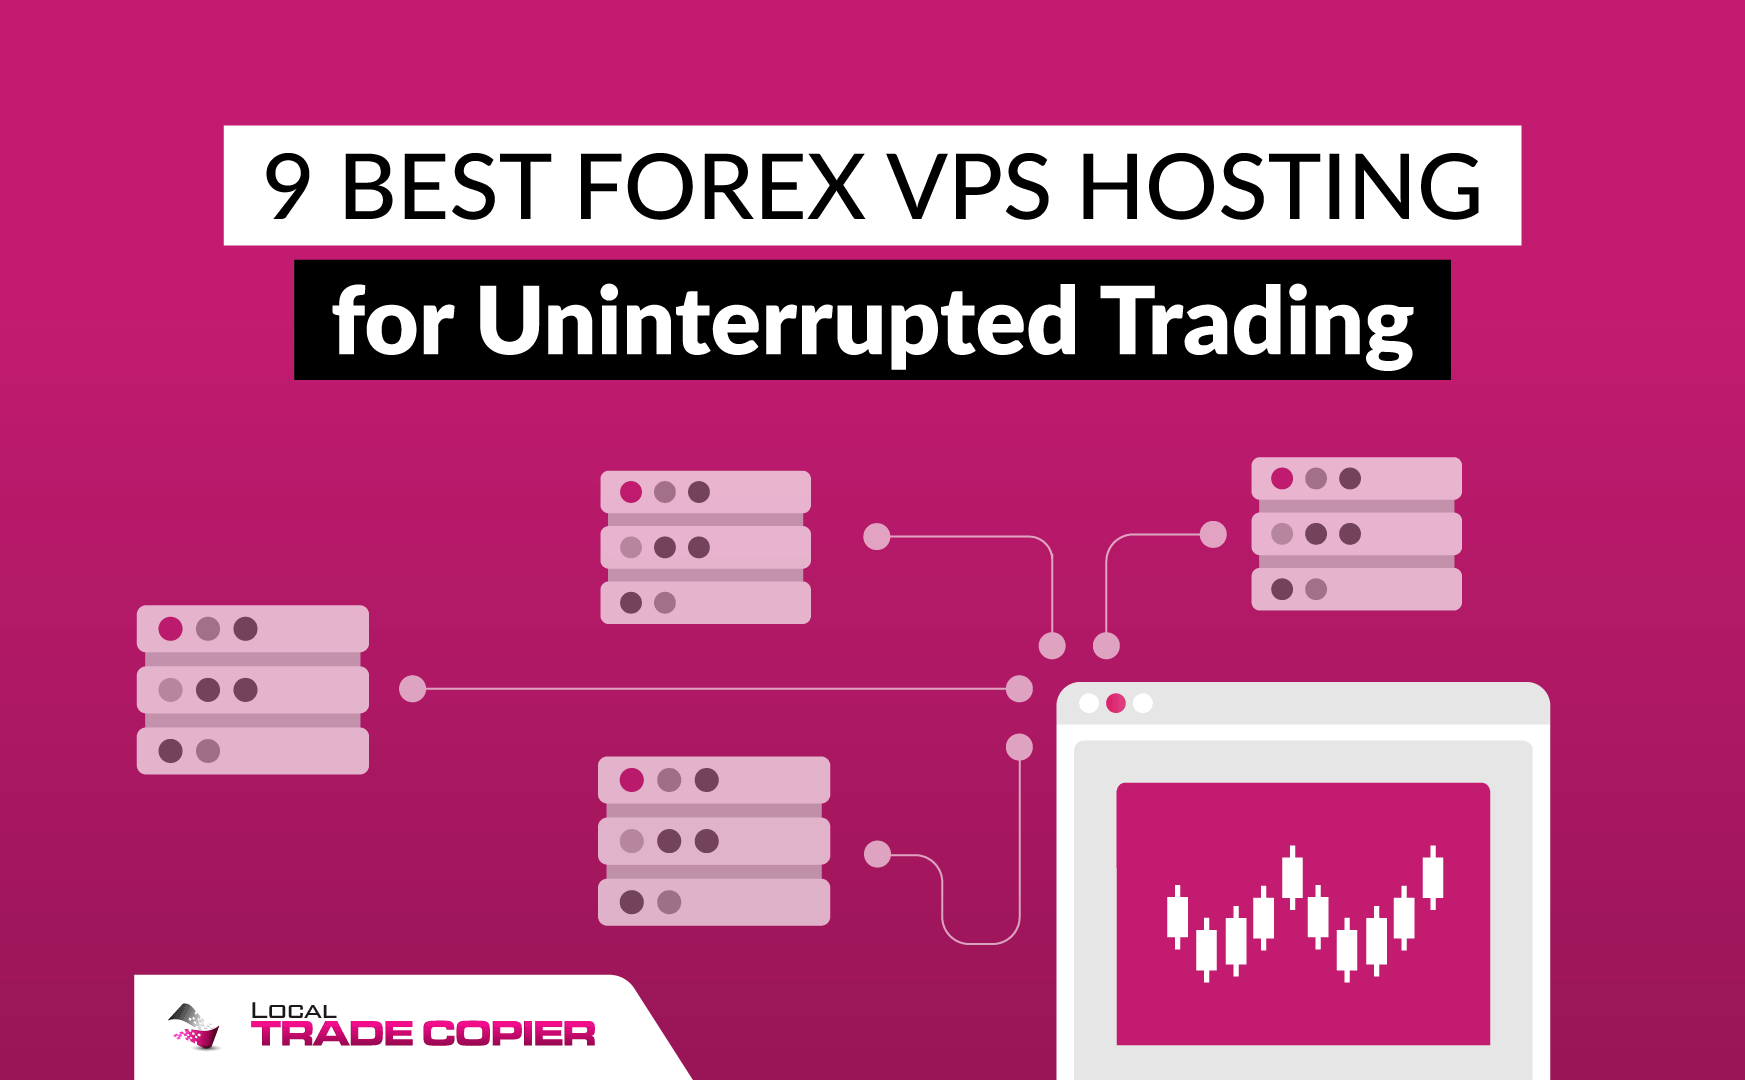 Enhance your trading with the best & affordable Forex VPS service